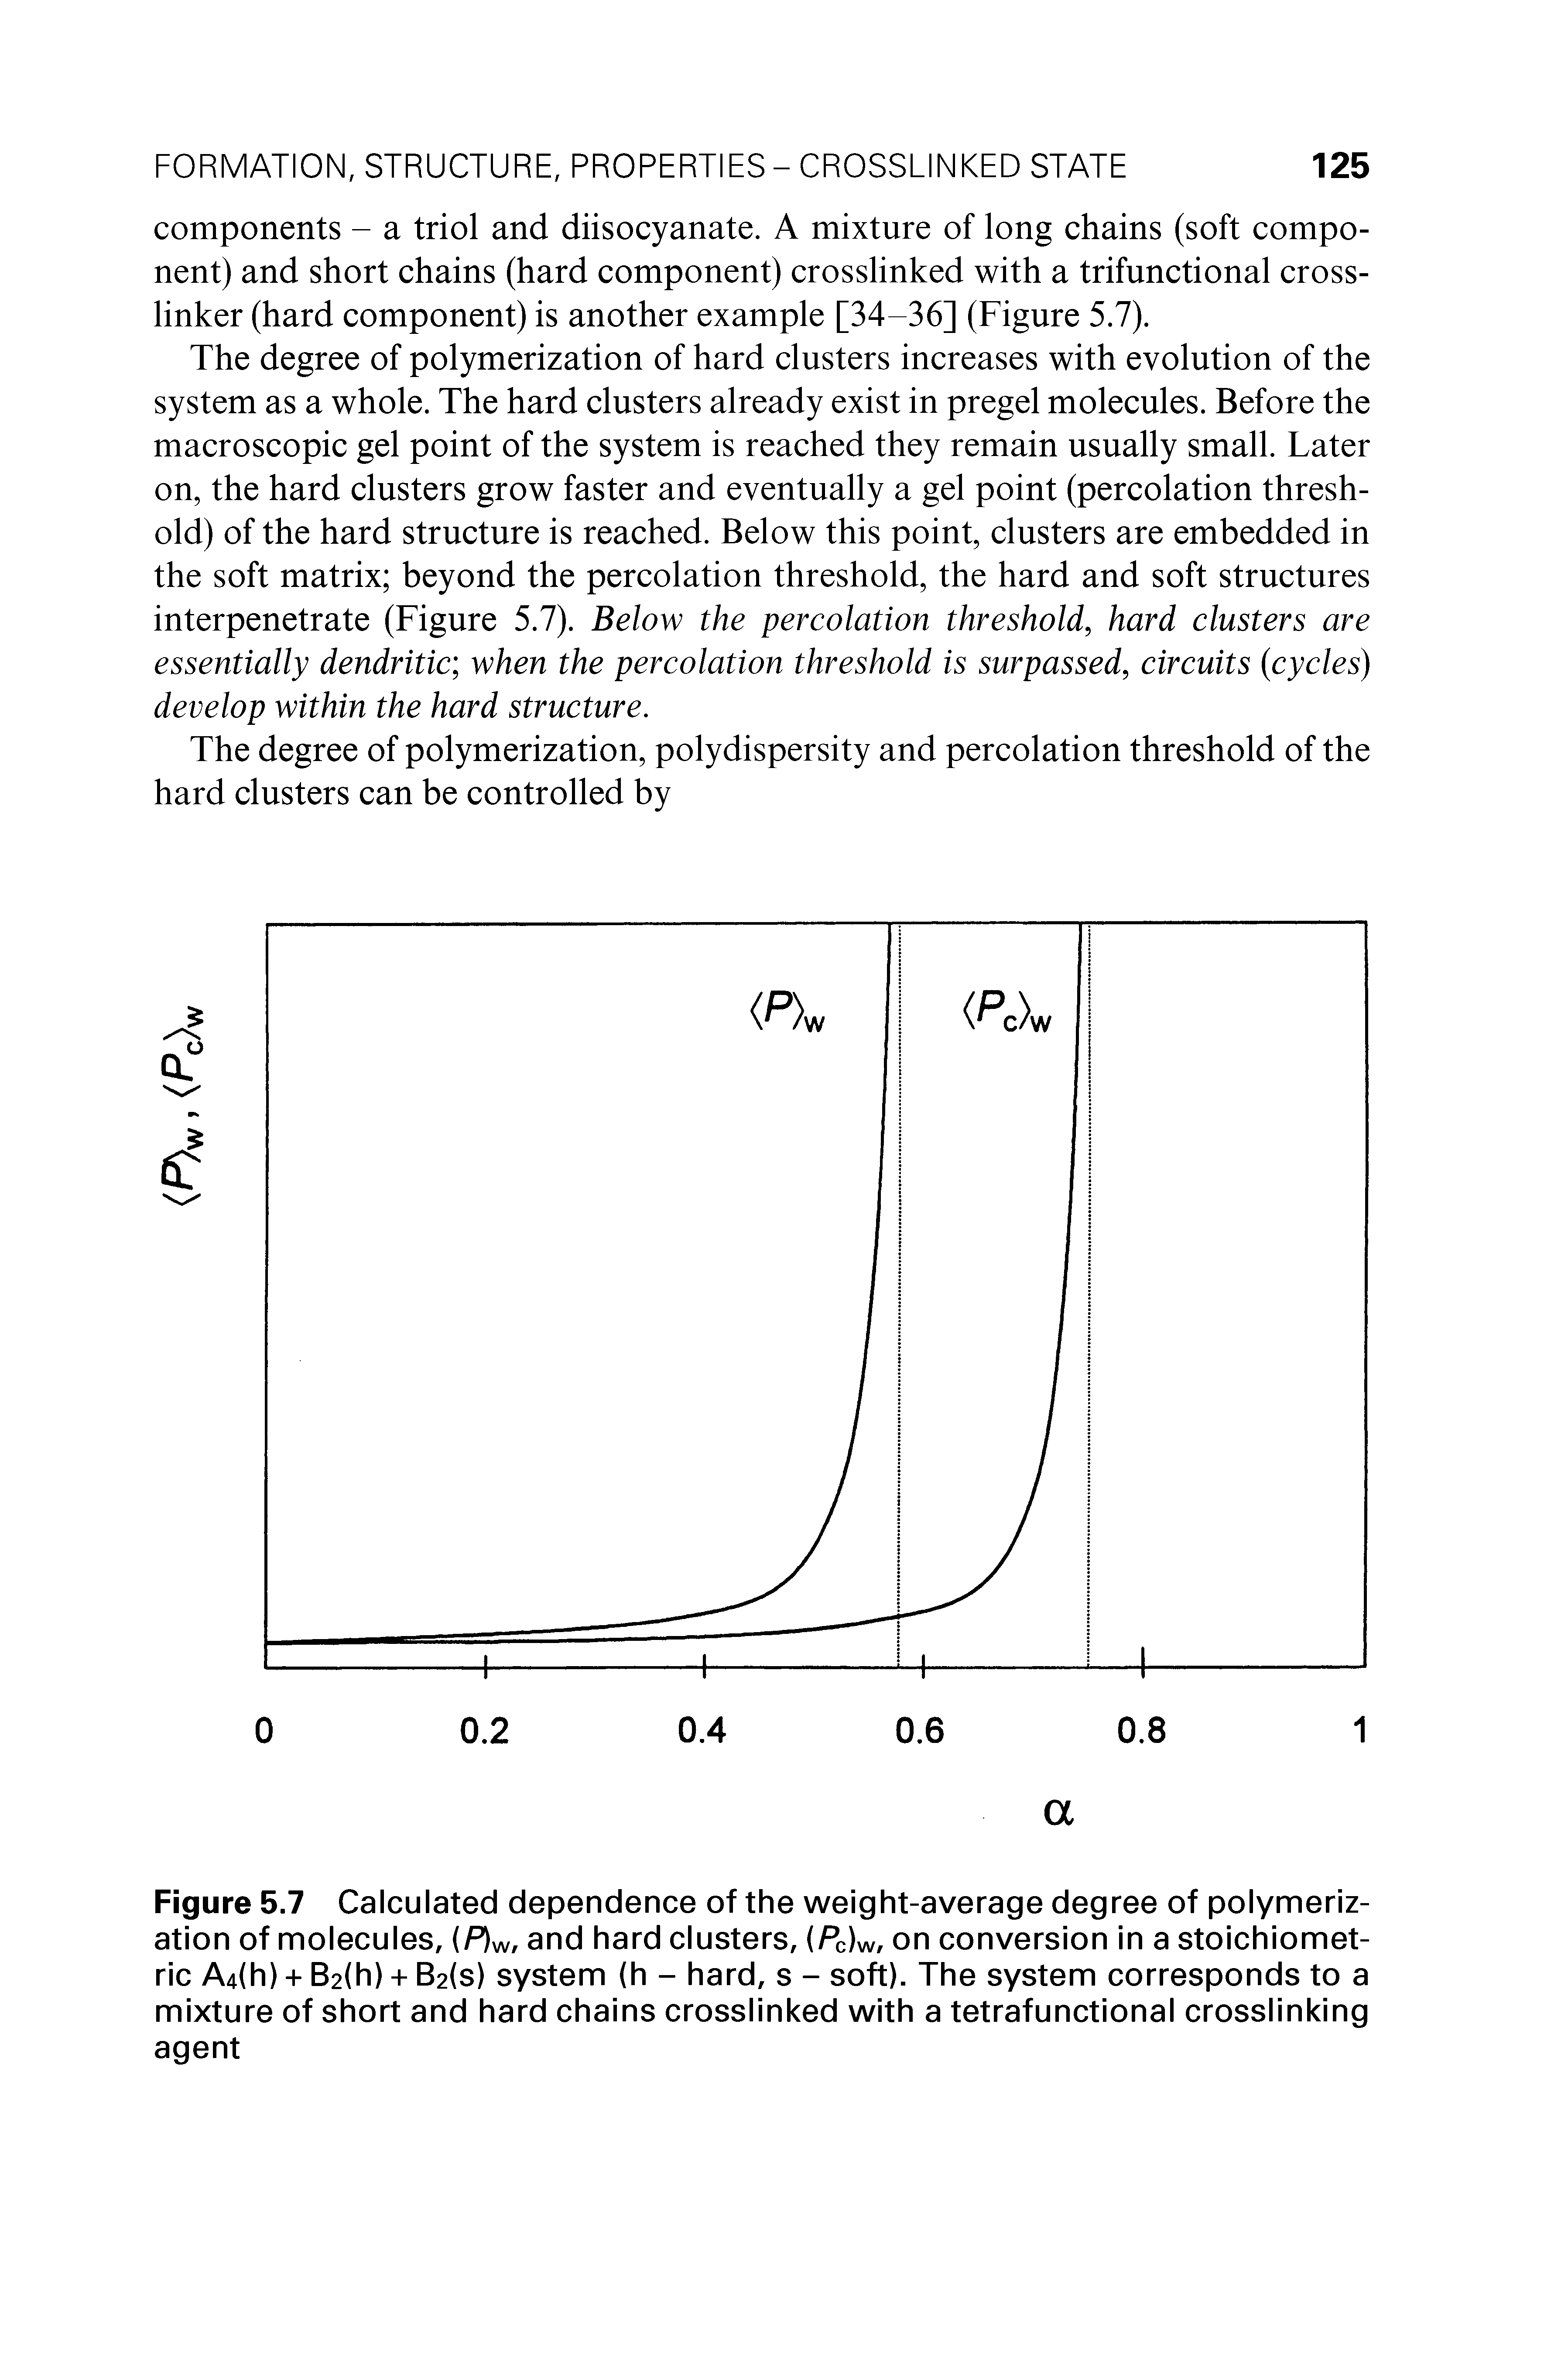 Figure 5.7 Calculated dependence of the weight-average degree of polymerization of molecules, (P)w, and hard clusters, (Pc)w, on conversion in a stoichiometric Adh) + B2(h) + B2(s) system (h - hard, s - soft). The system corresponds to a mixture of short and hard chains crosslinked with a tetrafunctional crosslinking agent...